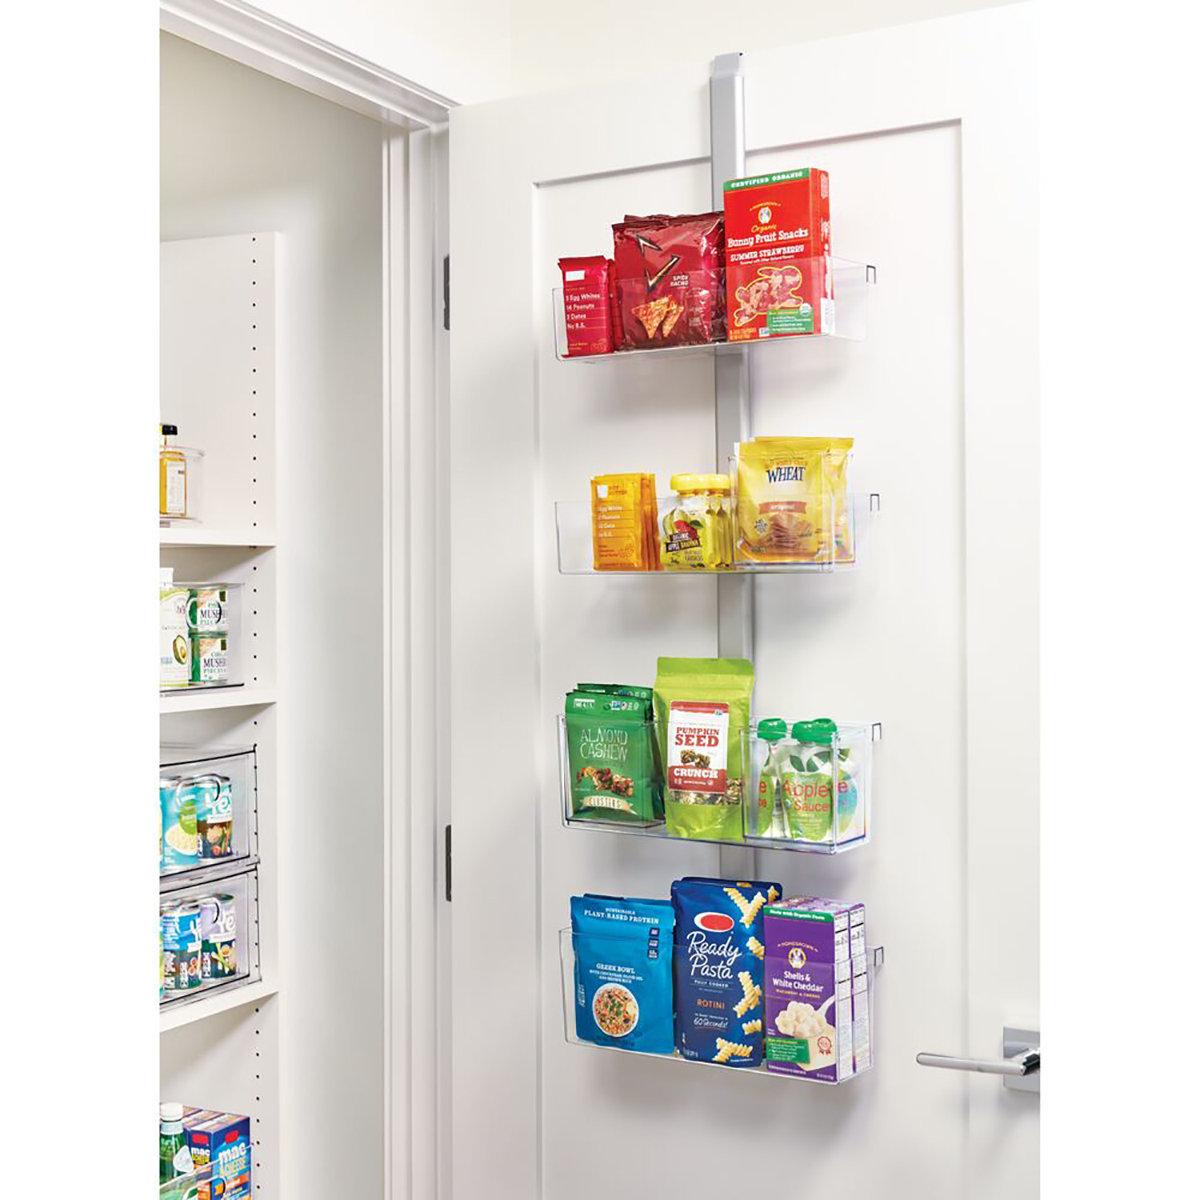  Over the Door Organizer - 8-Tier Hanging Wall Rack for Bathroom  or Kitchen Organization - Pantry Organization and Storage by Home-Complete  (White) : Home & Kitchen